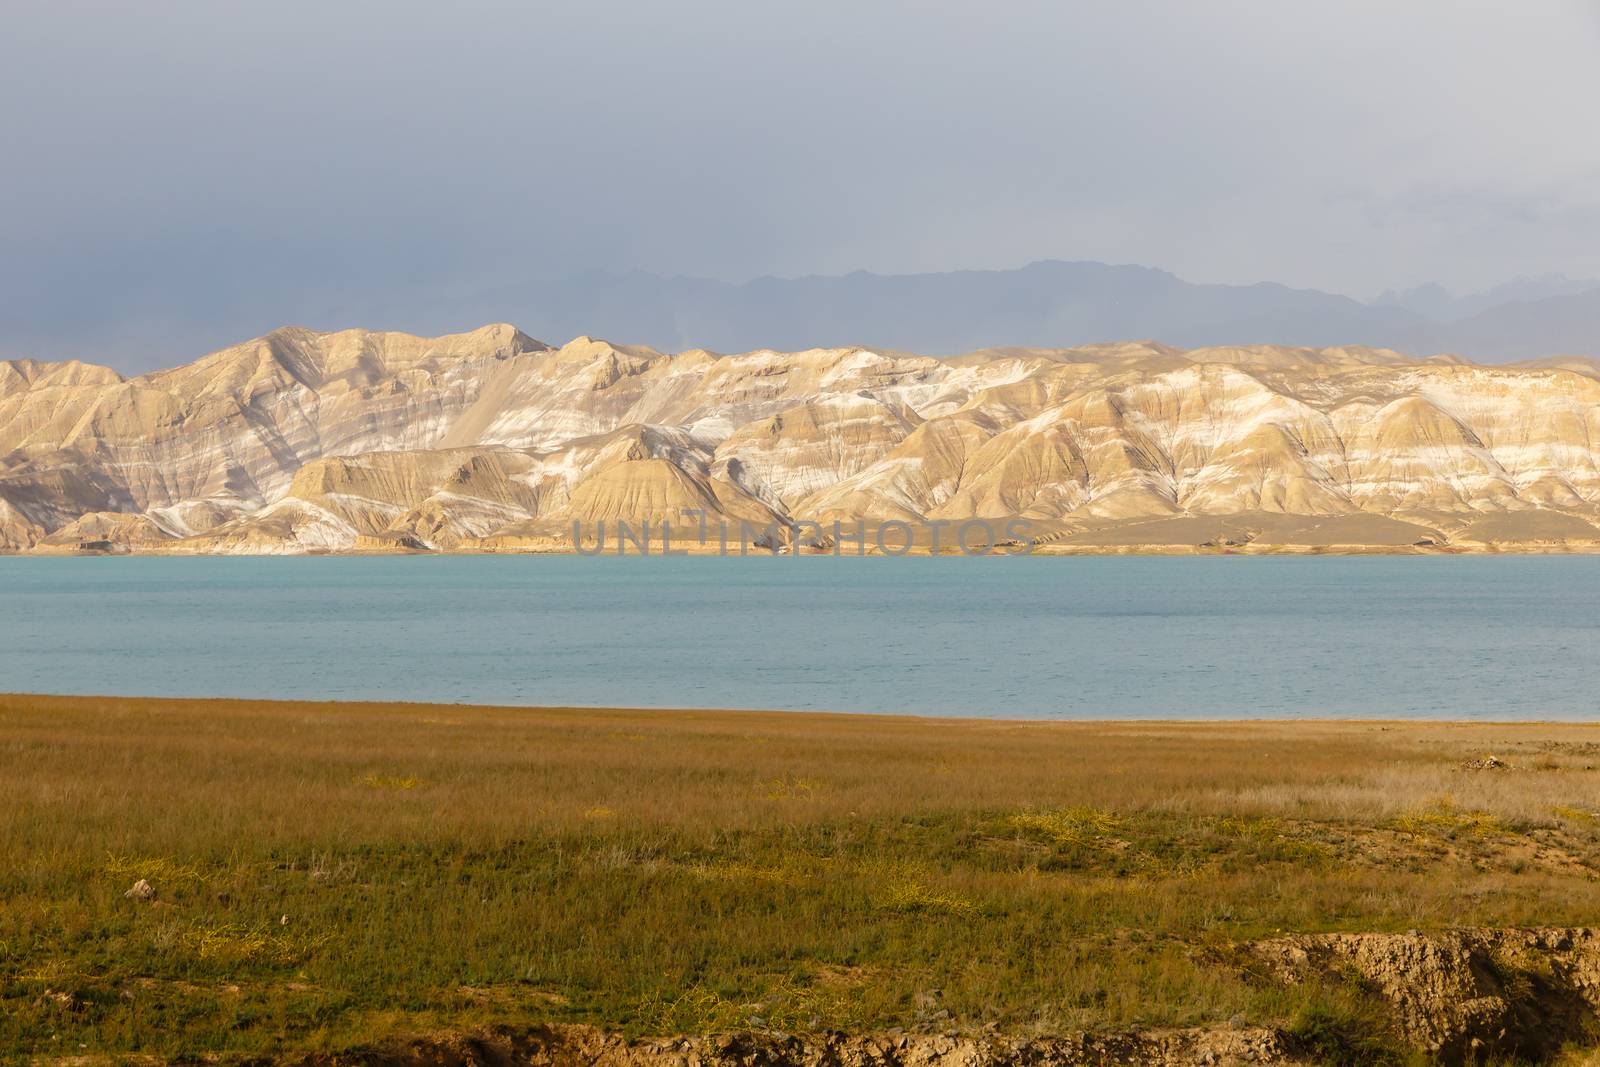 Toktogul Reservoir, reservoir in the territory of the Toktogul district of the Jalal-Abad region of Kyrgyzstan